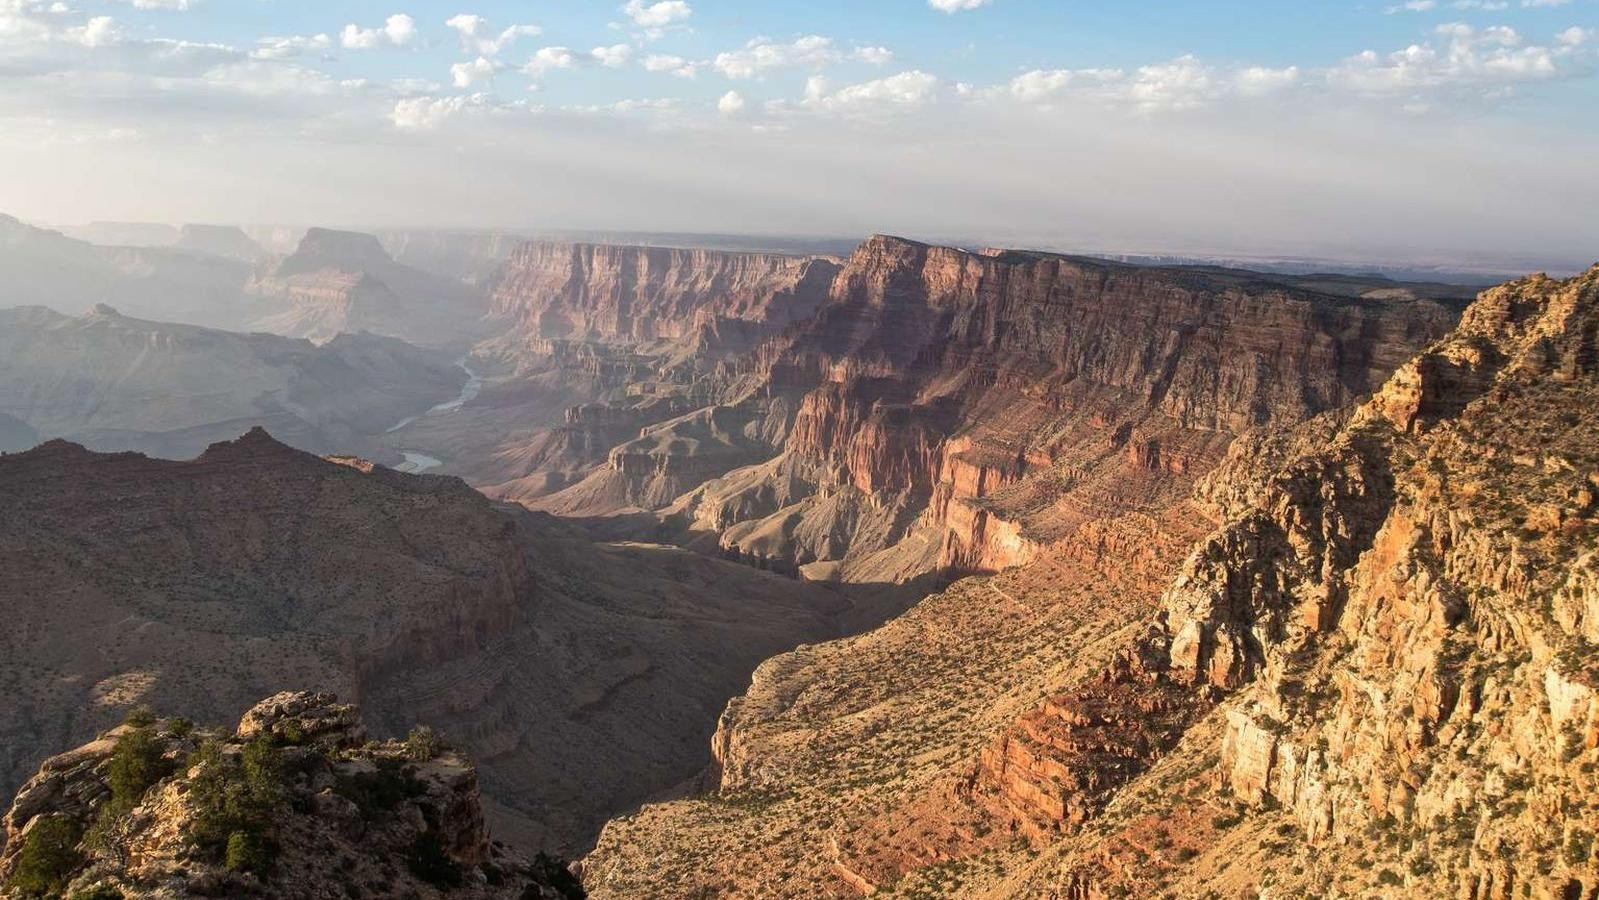 Colorful canyon walls and the Colorado River stretch into the distance beneath a blue sky.